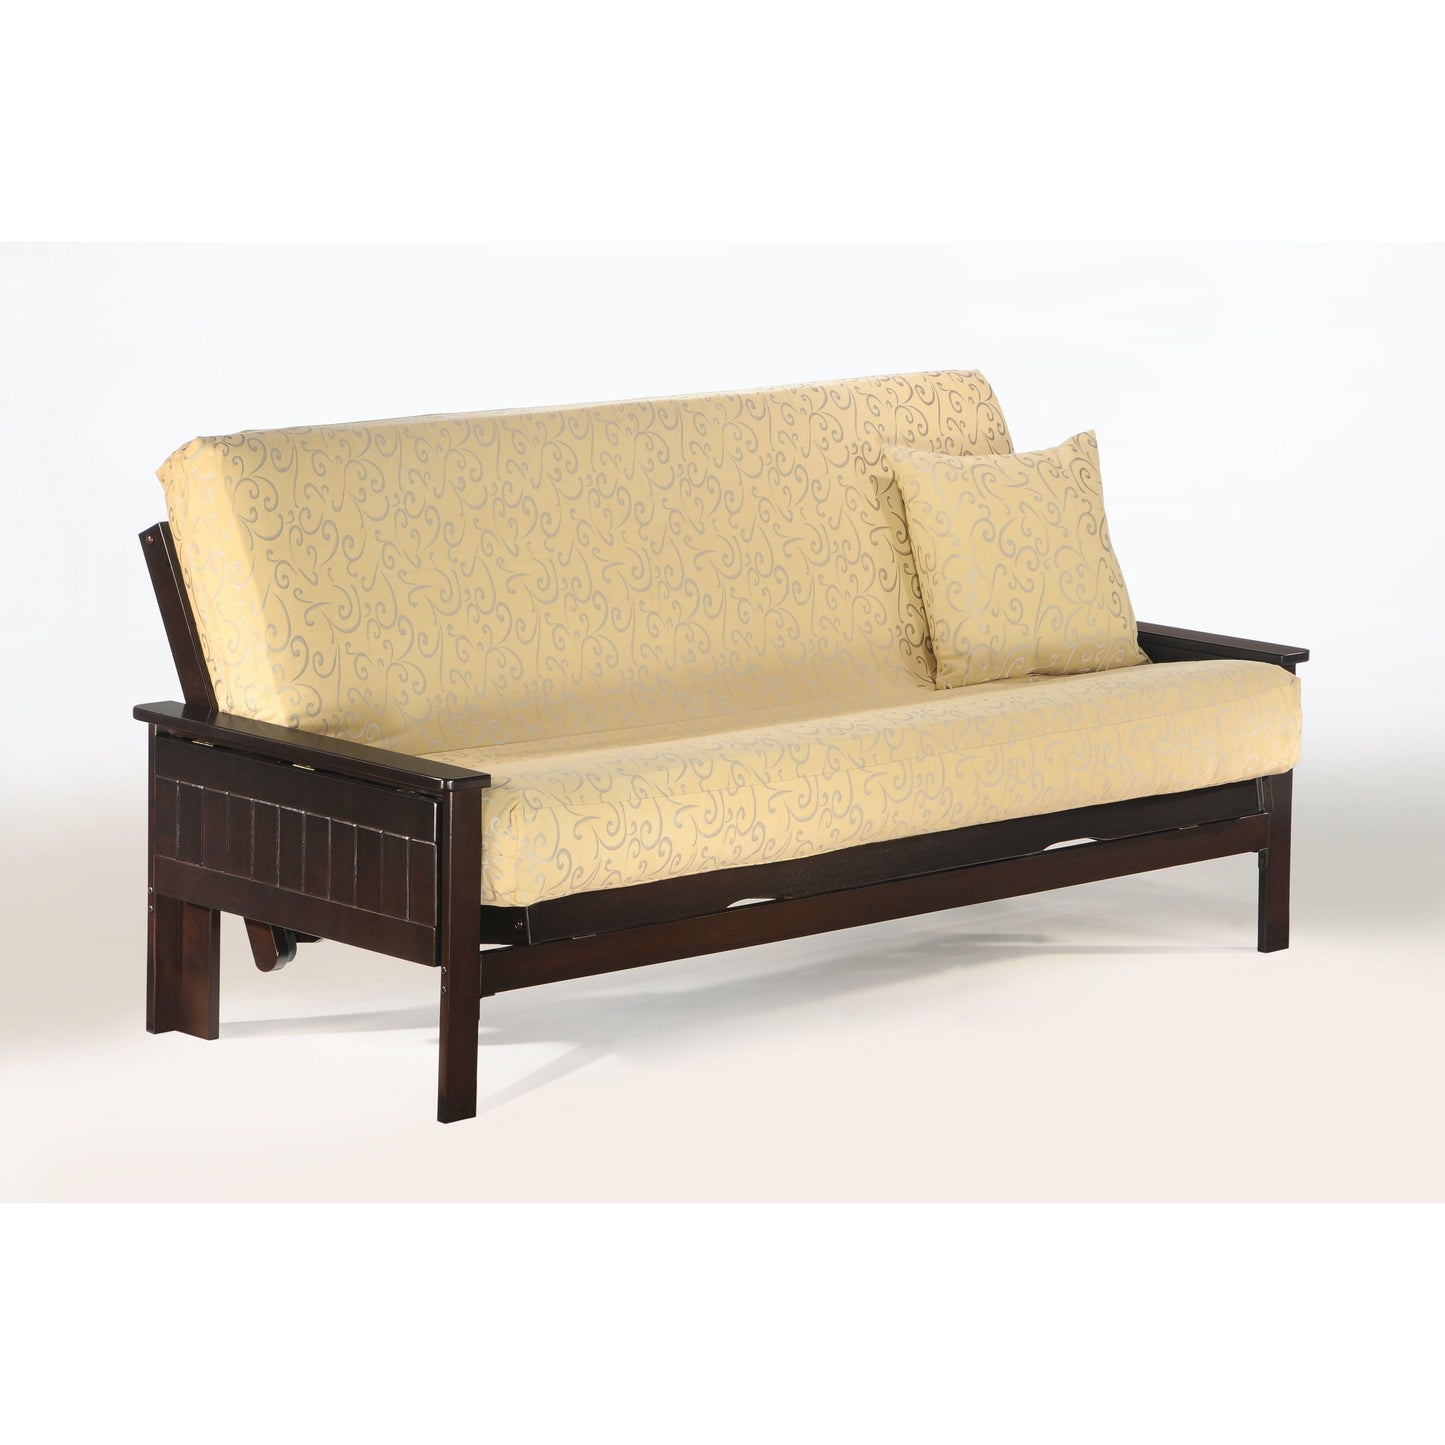 Night and Day Seattle Queen Futon Frame in black walnut finish Chocolate